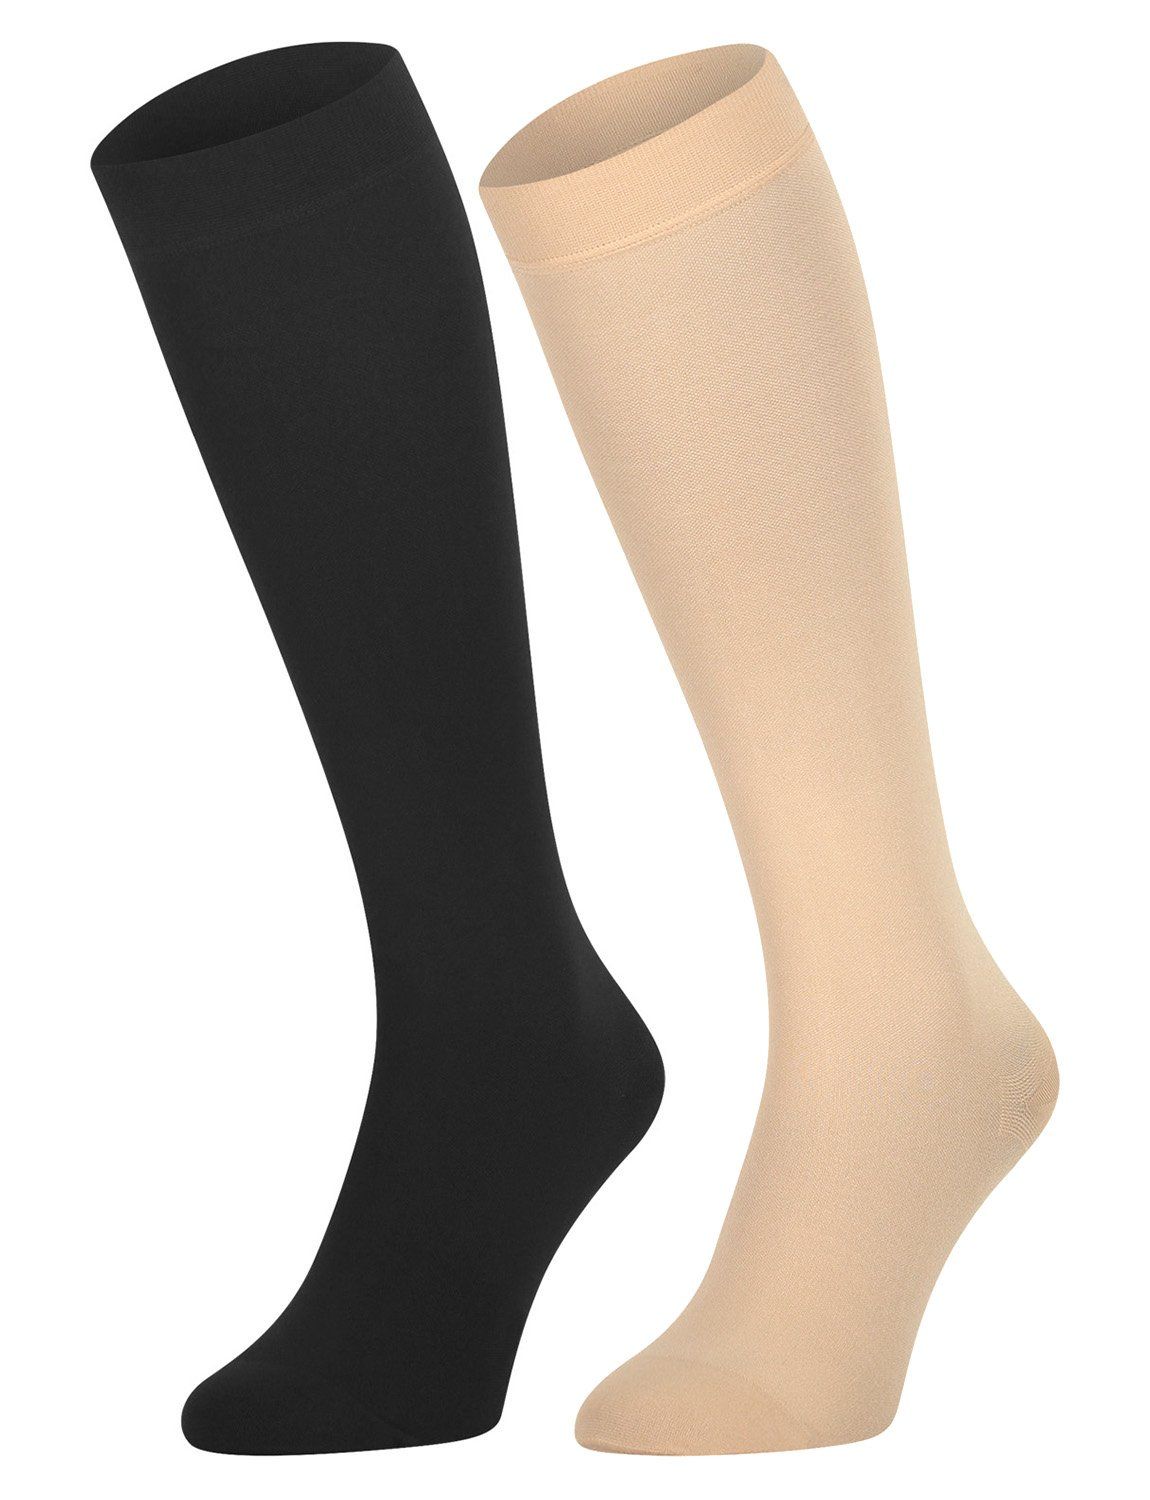 dunimed premium comfort compression stockings short closed toe black and skin for sale